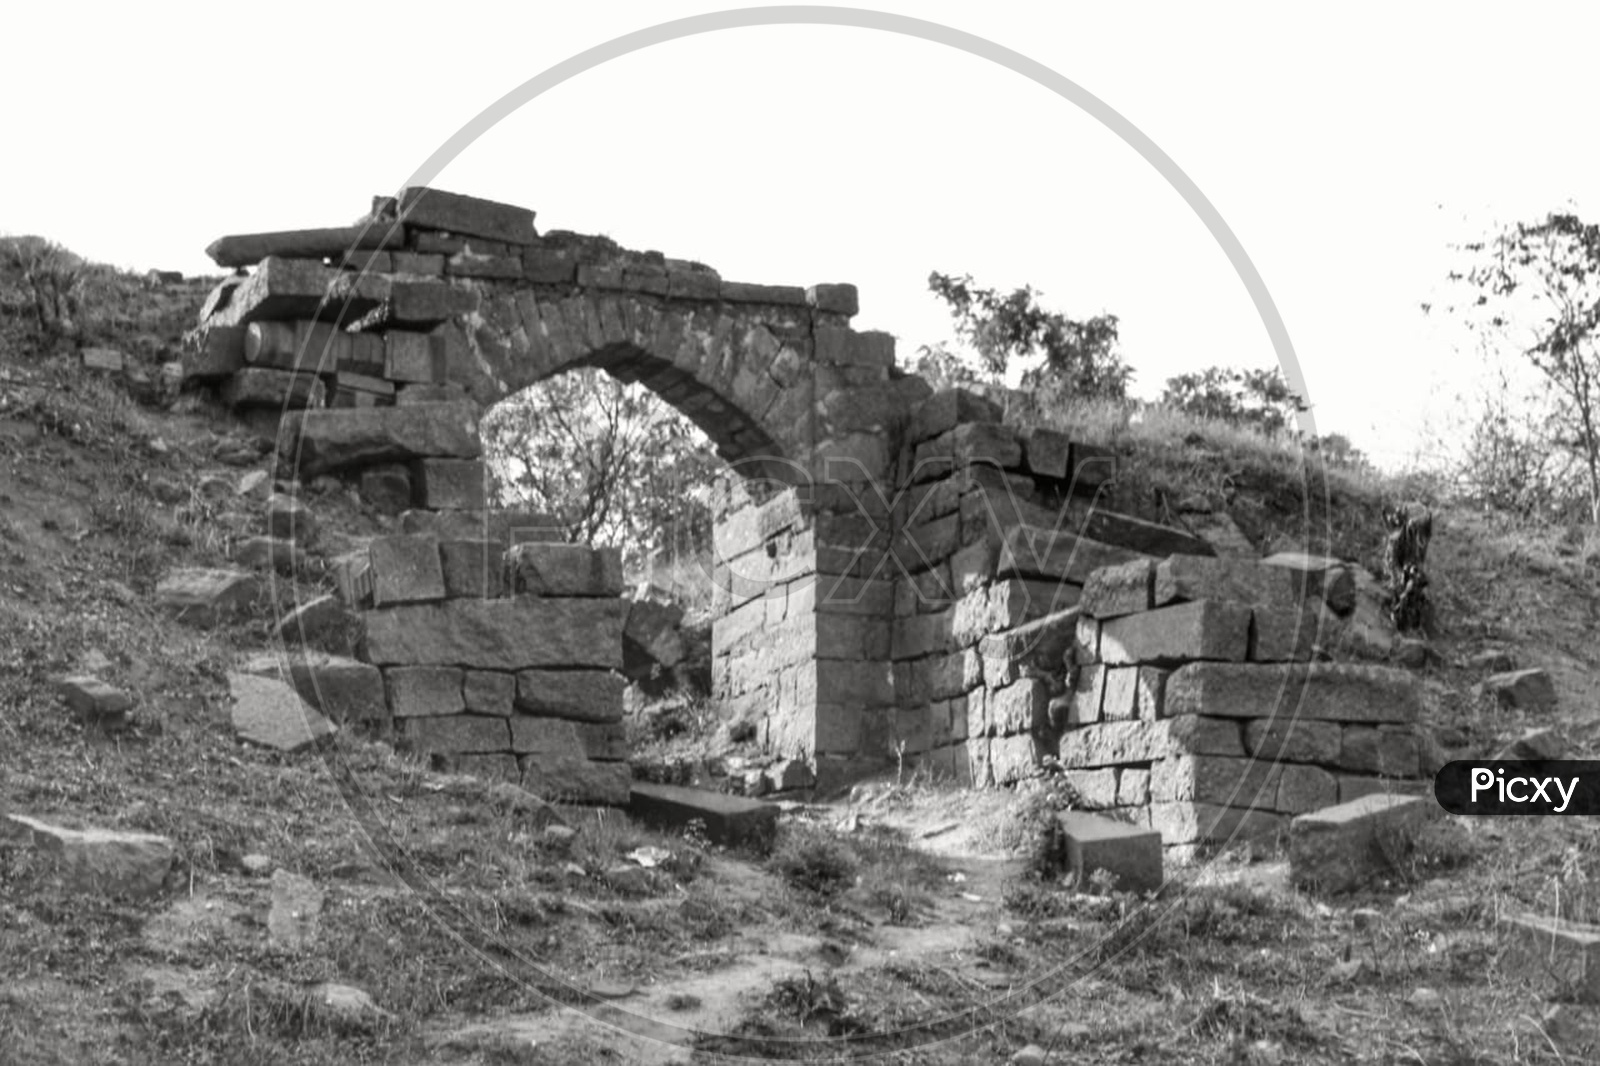 Old  Ruins  Of Ancient Temples Built During Kakathiya Dynasty In Warangal